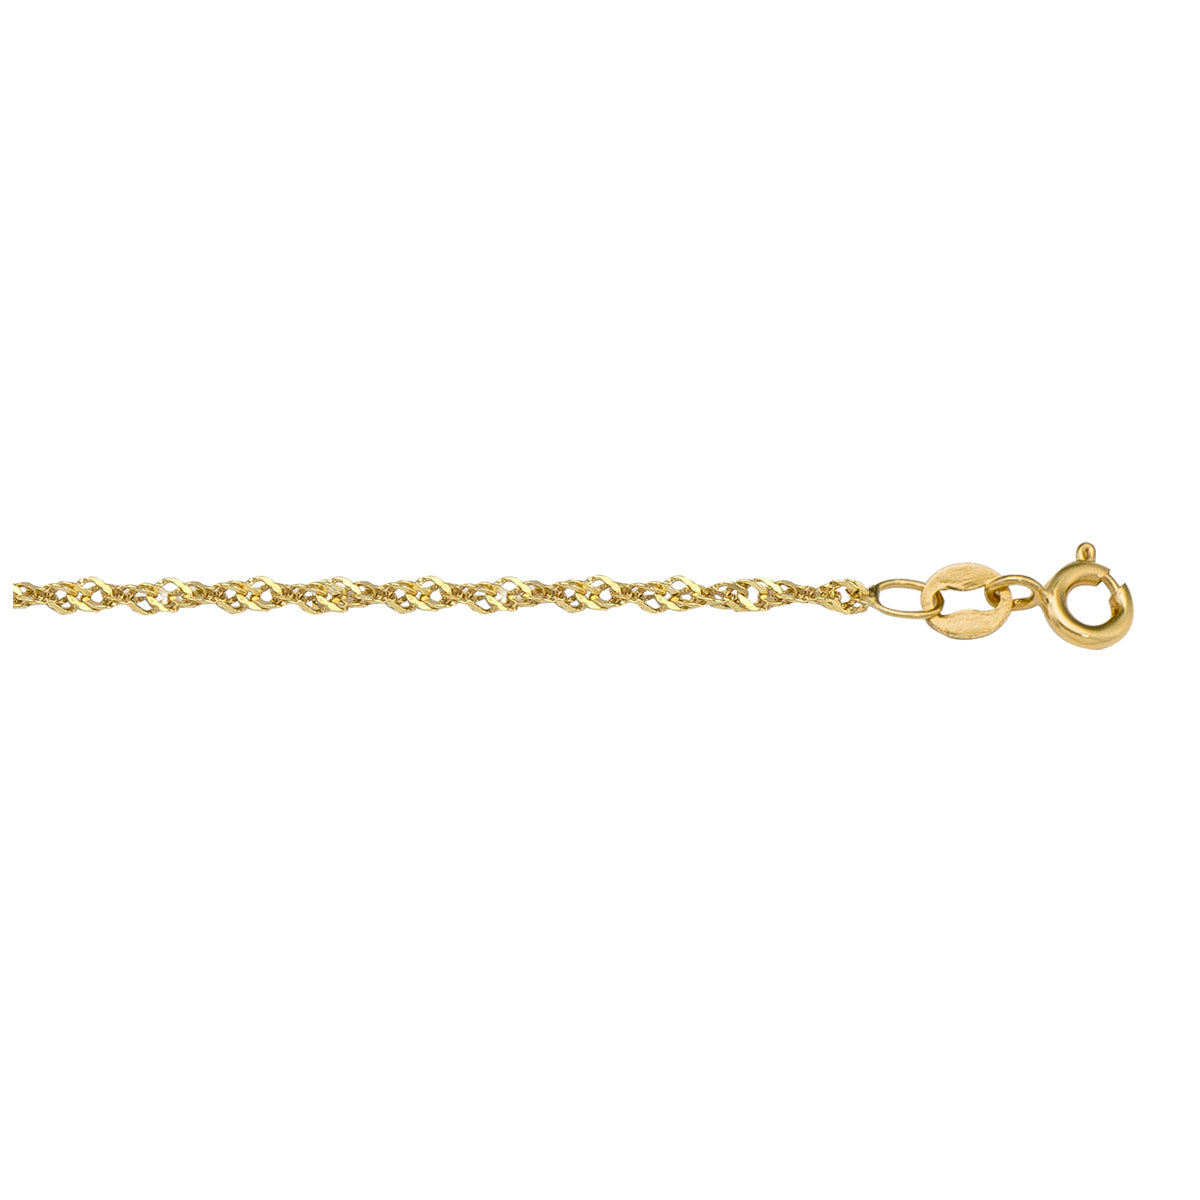 GOLD CHAIN YELLOW GOLD LIGHTLY PLATED SOLID SINGAPORE LINK